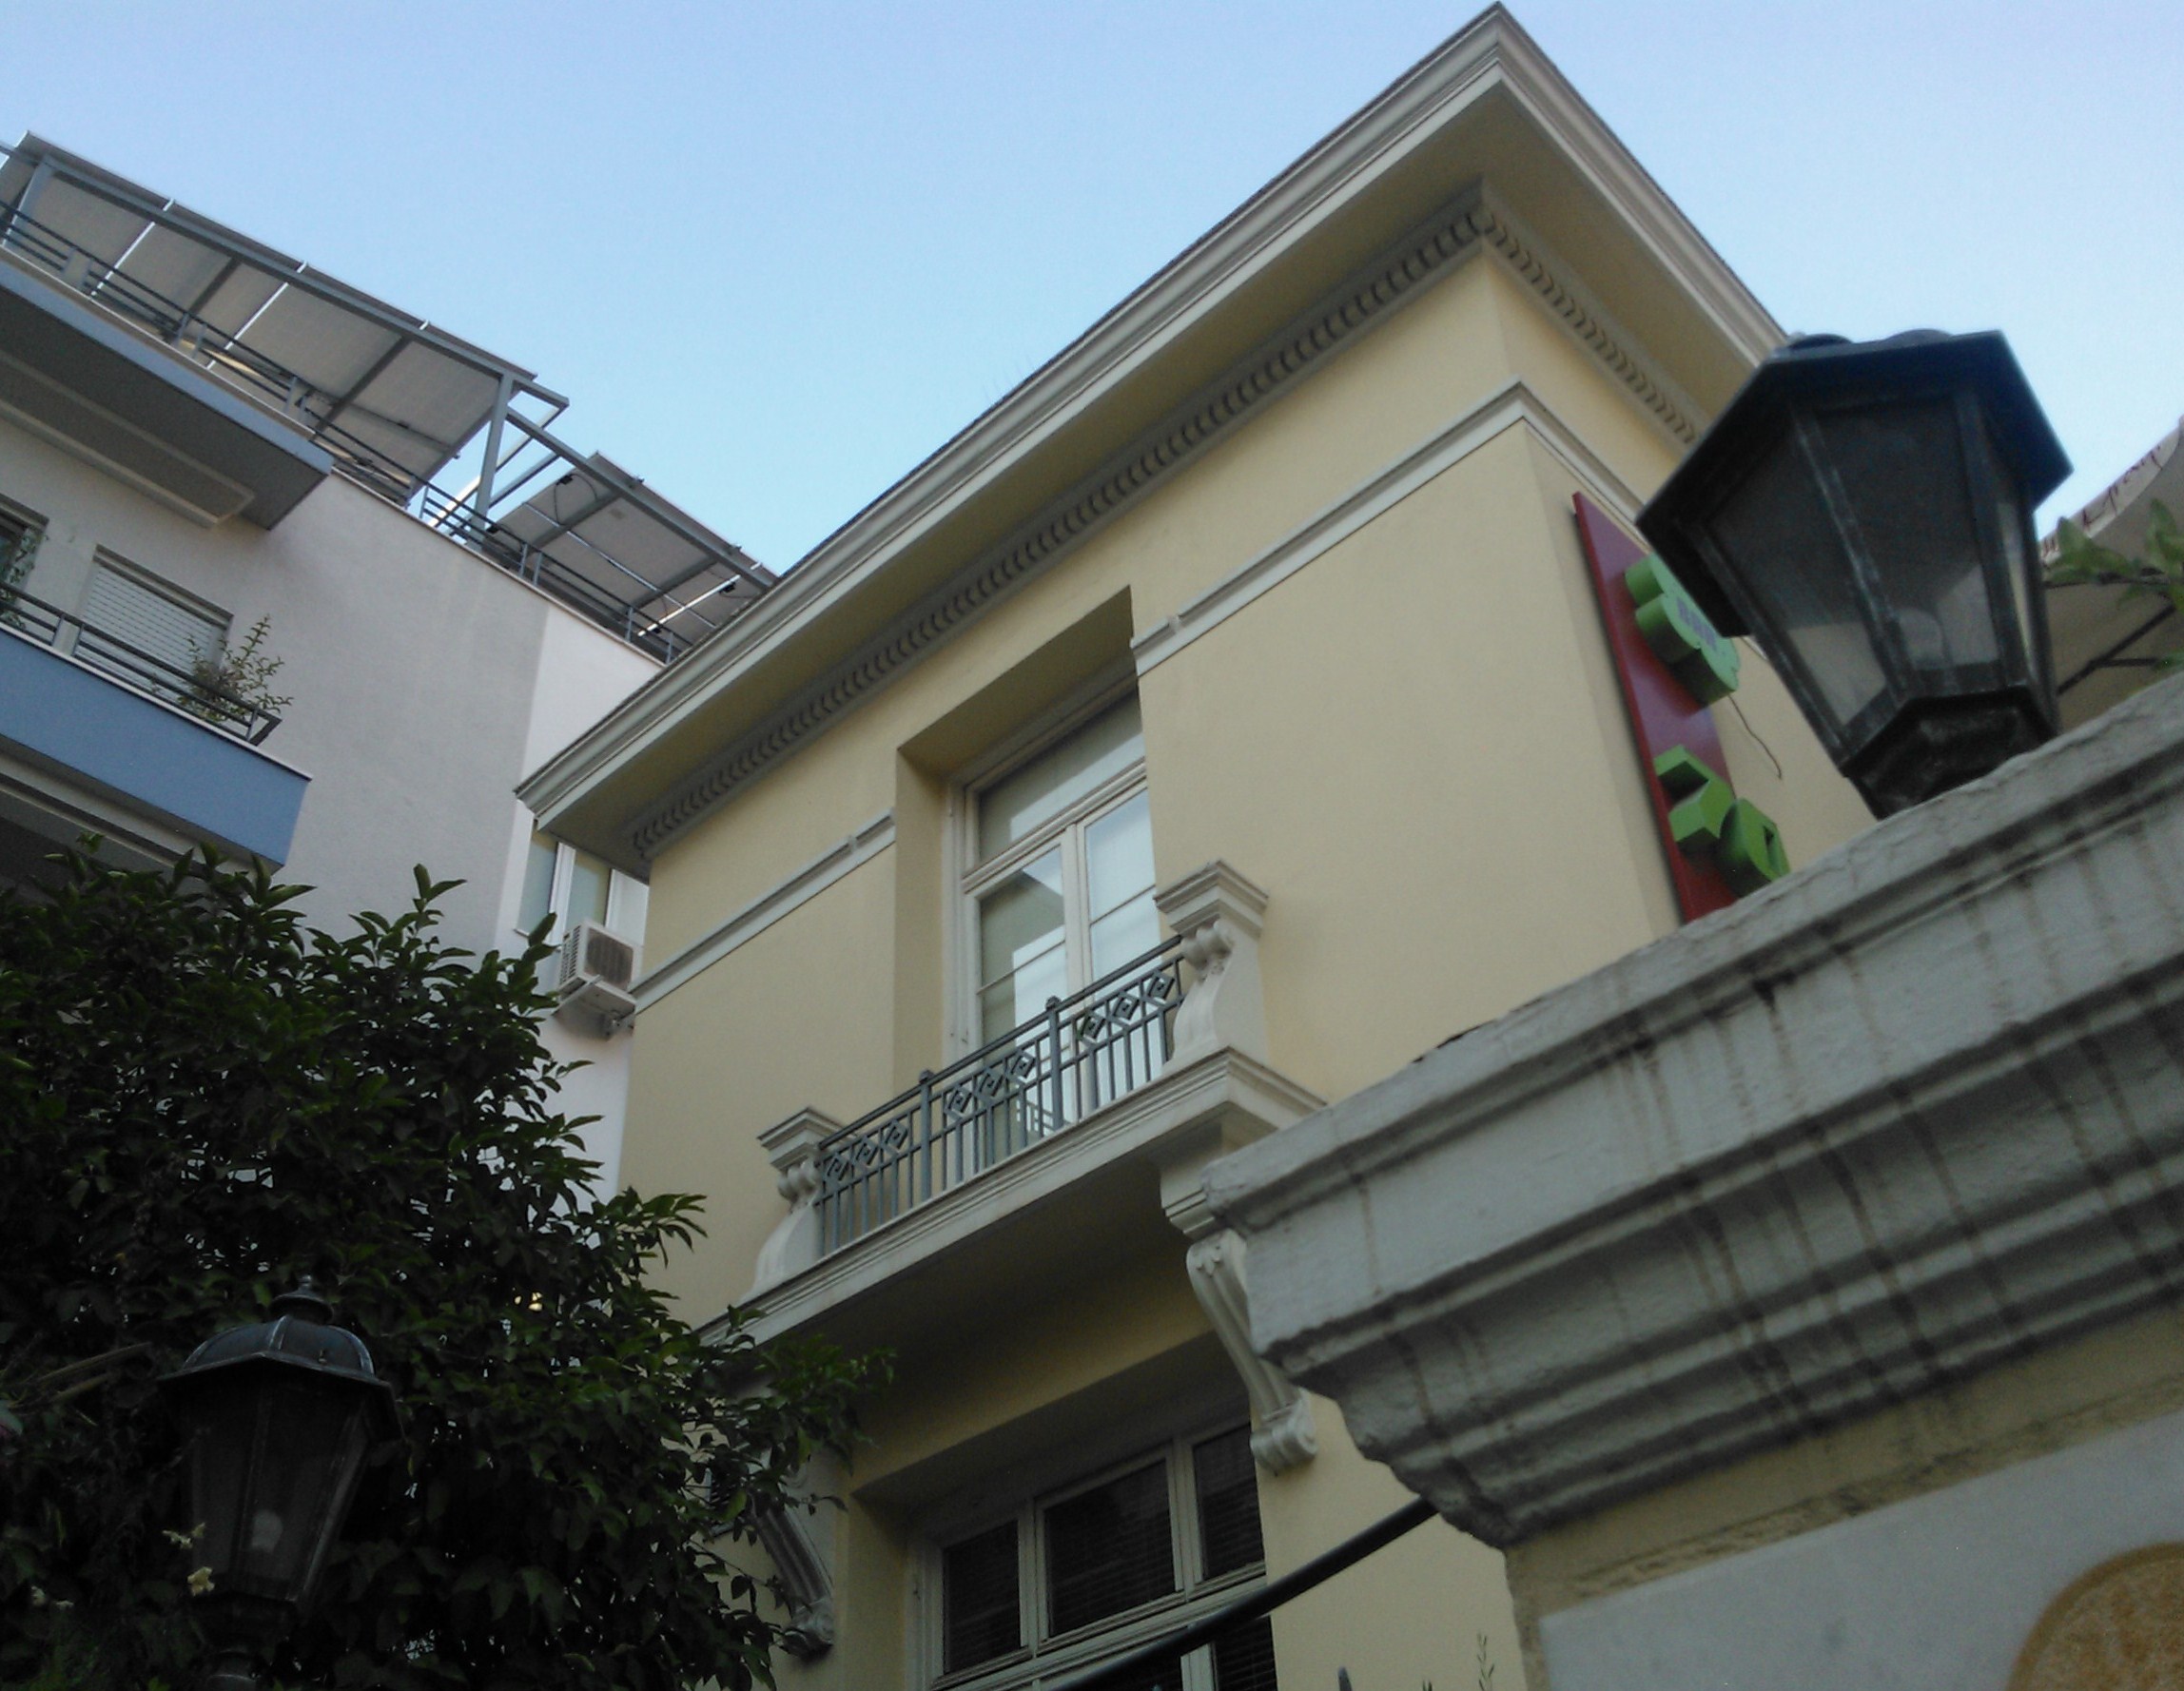 View of the balcony